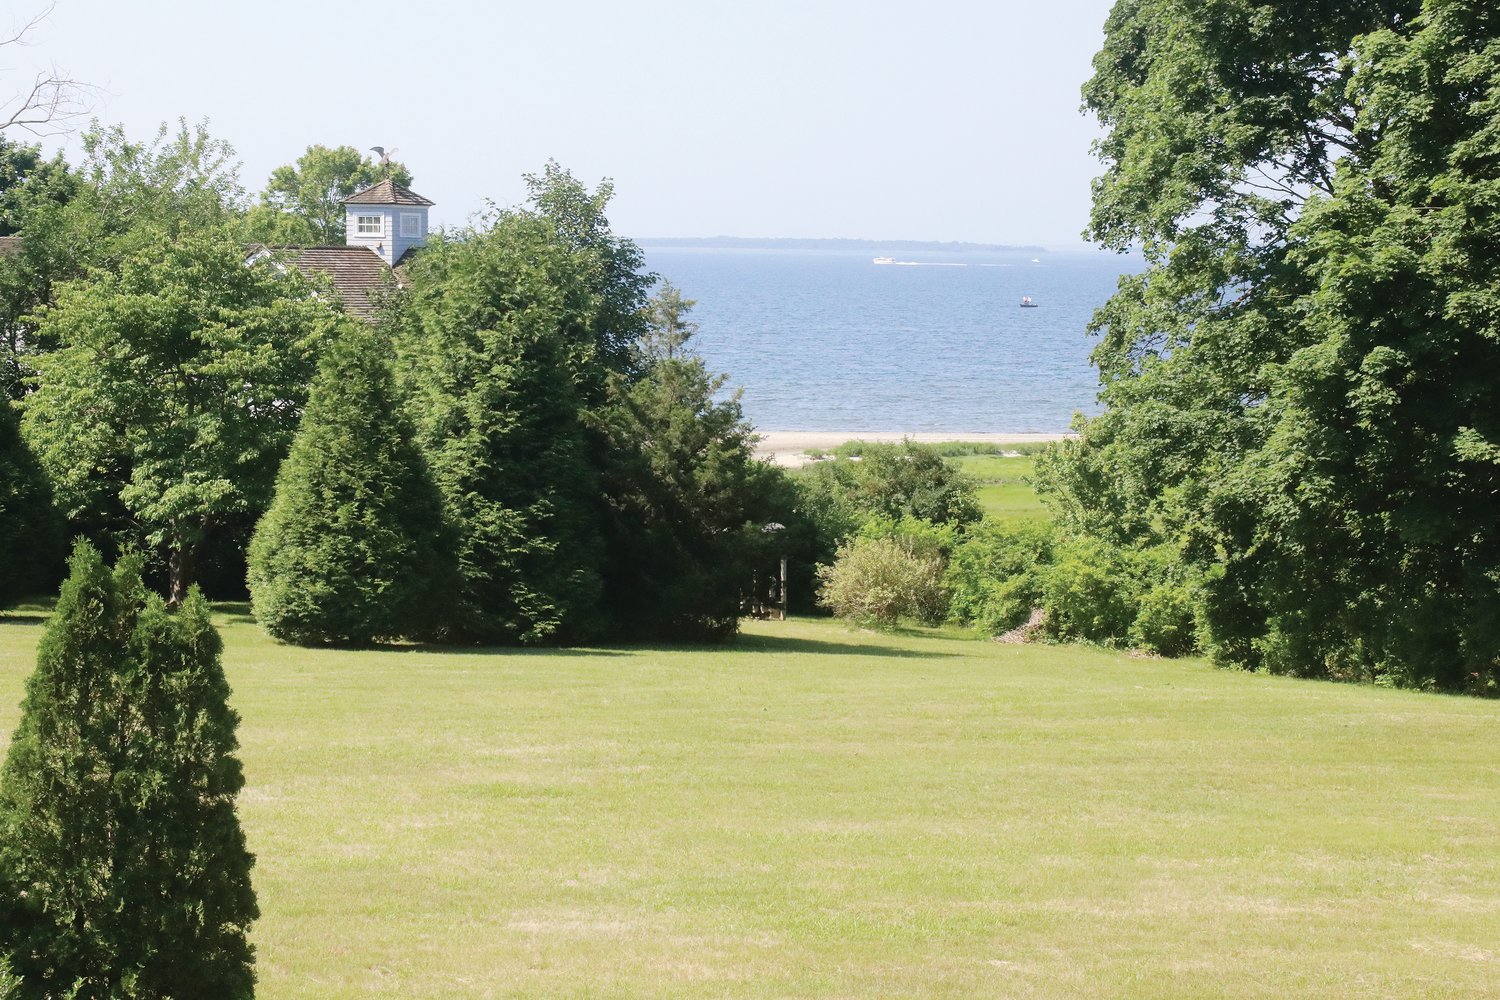 A view of the spacious grounds and Narragansett Bay that the Sisters had from the monastery.